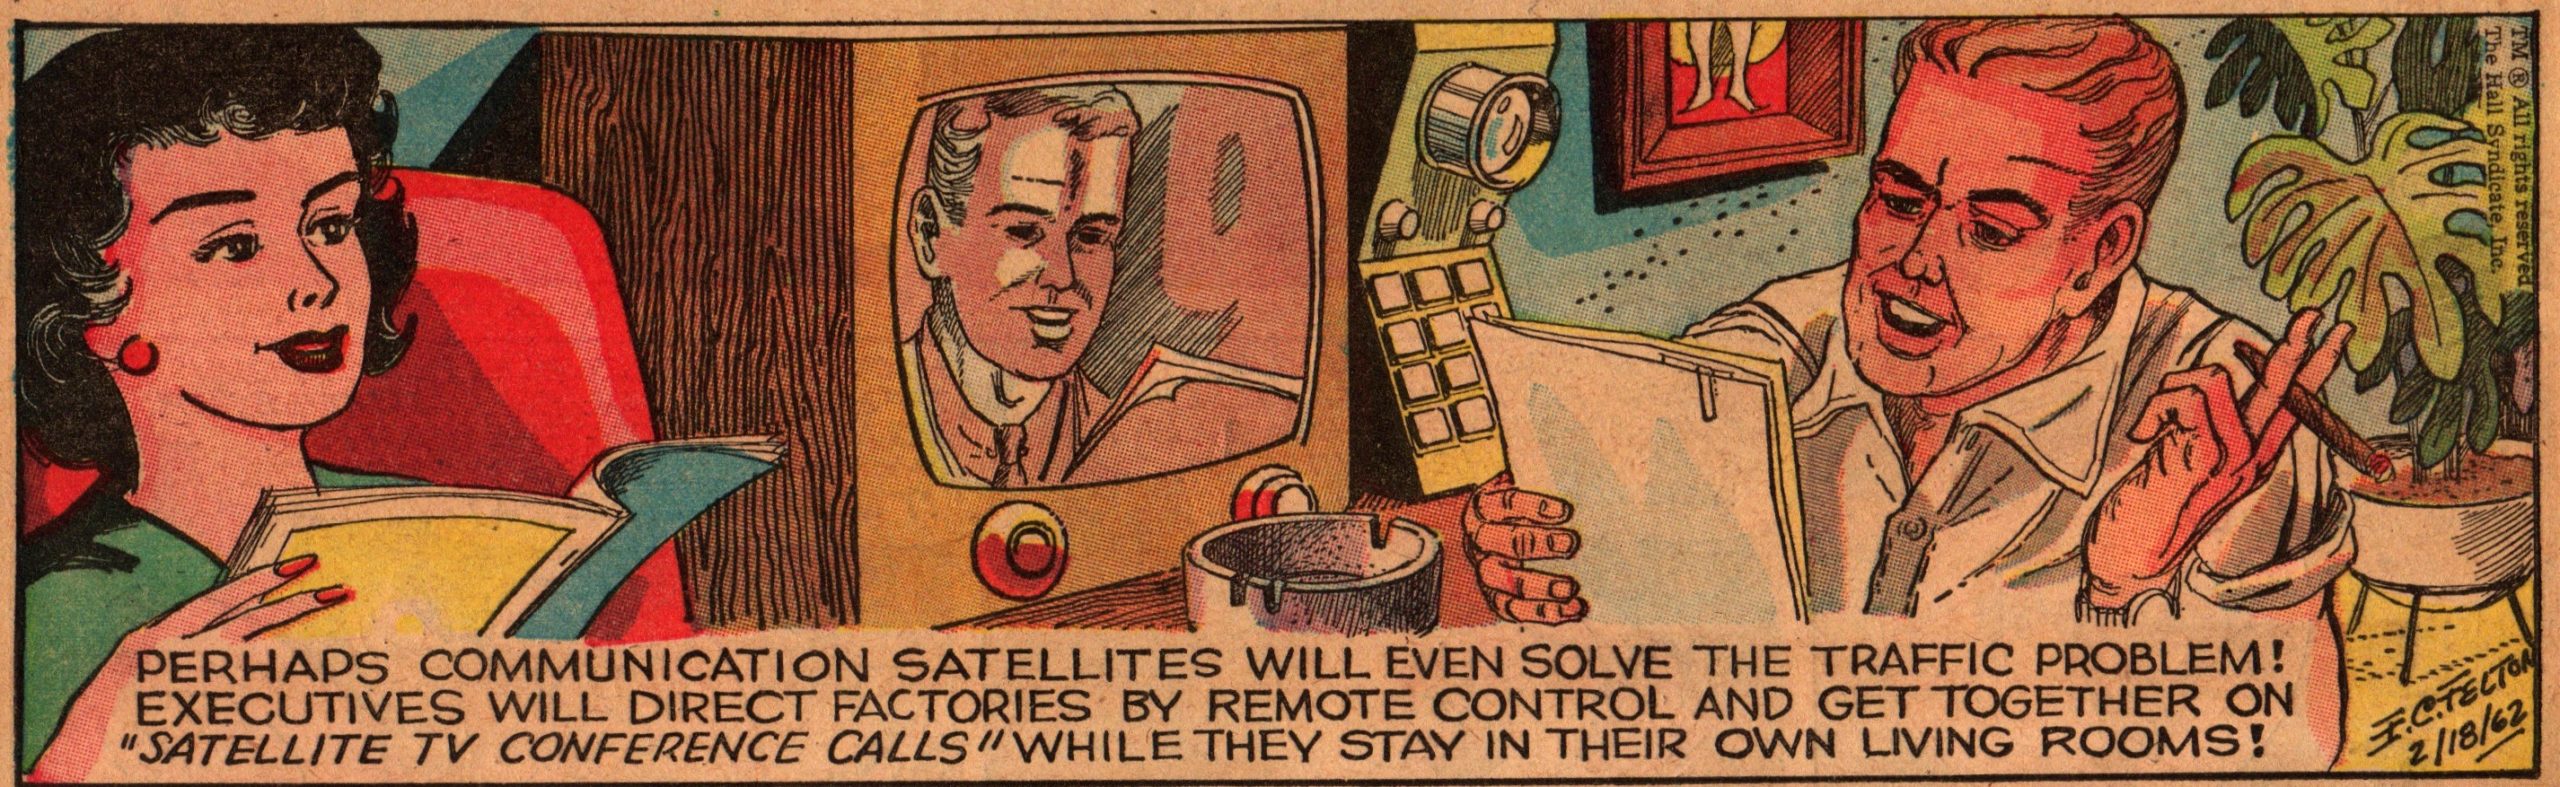 Amazing 1960s Predictions About Satellites, Email And The Internet